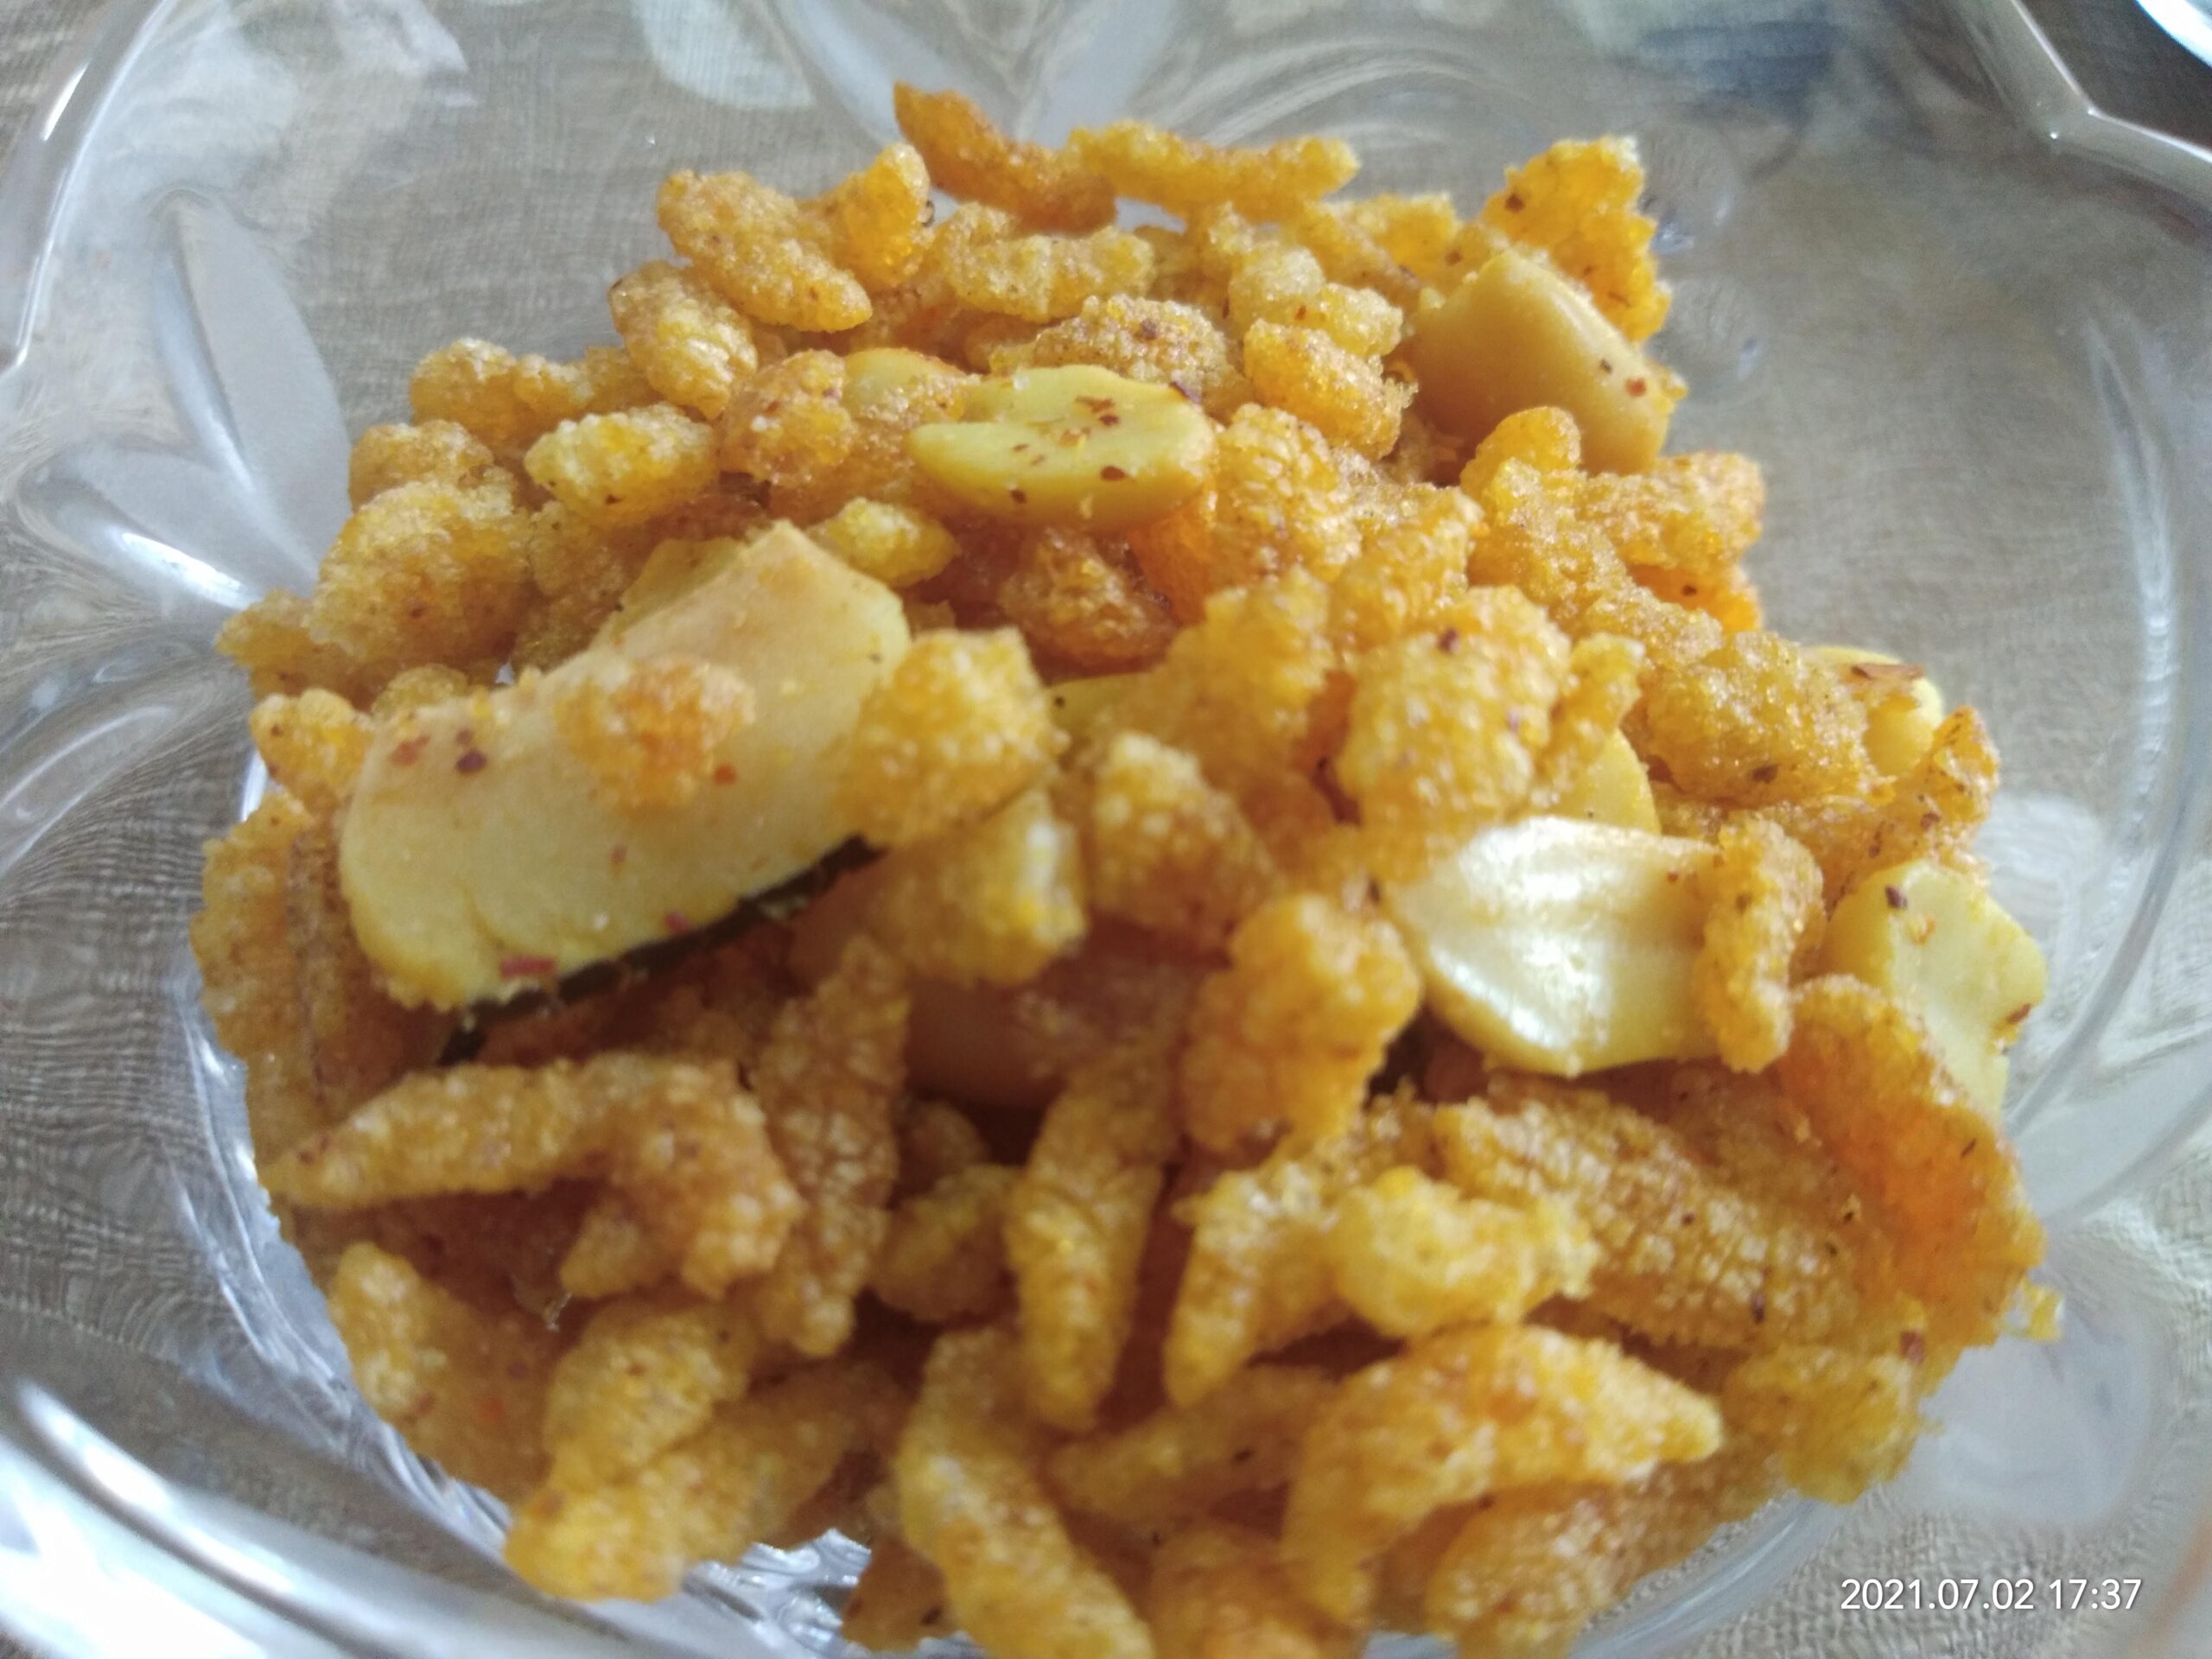 CHITALE BANDHU MITHAIWALE PRODUCTS IN MUMBAI - Travel And Food Blogger